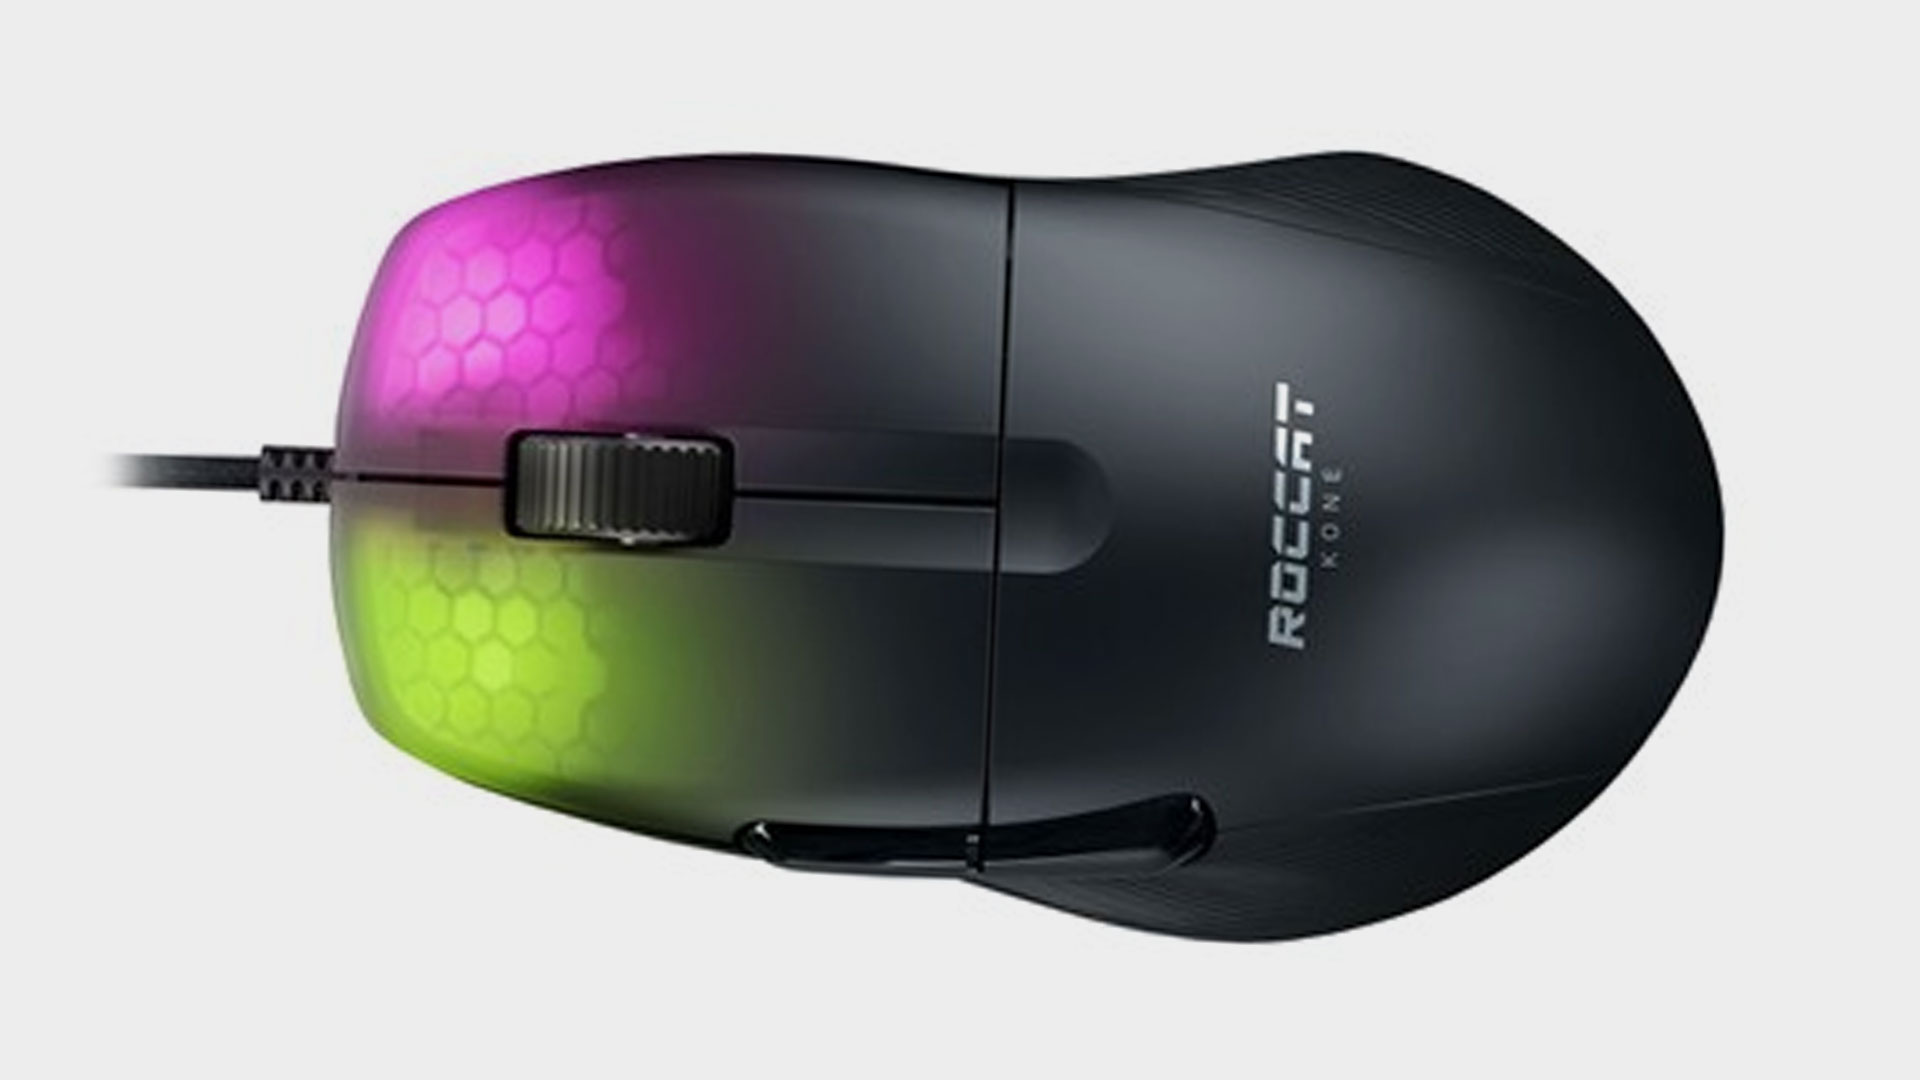 Roccat Kone Pro ultra-light wired gaming mouse